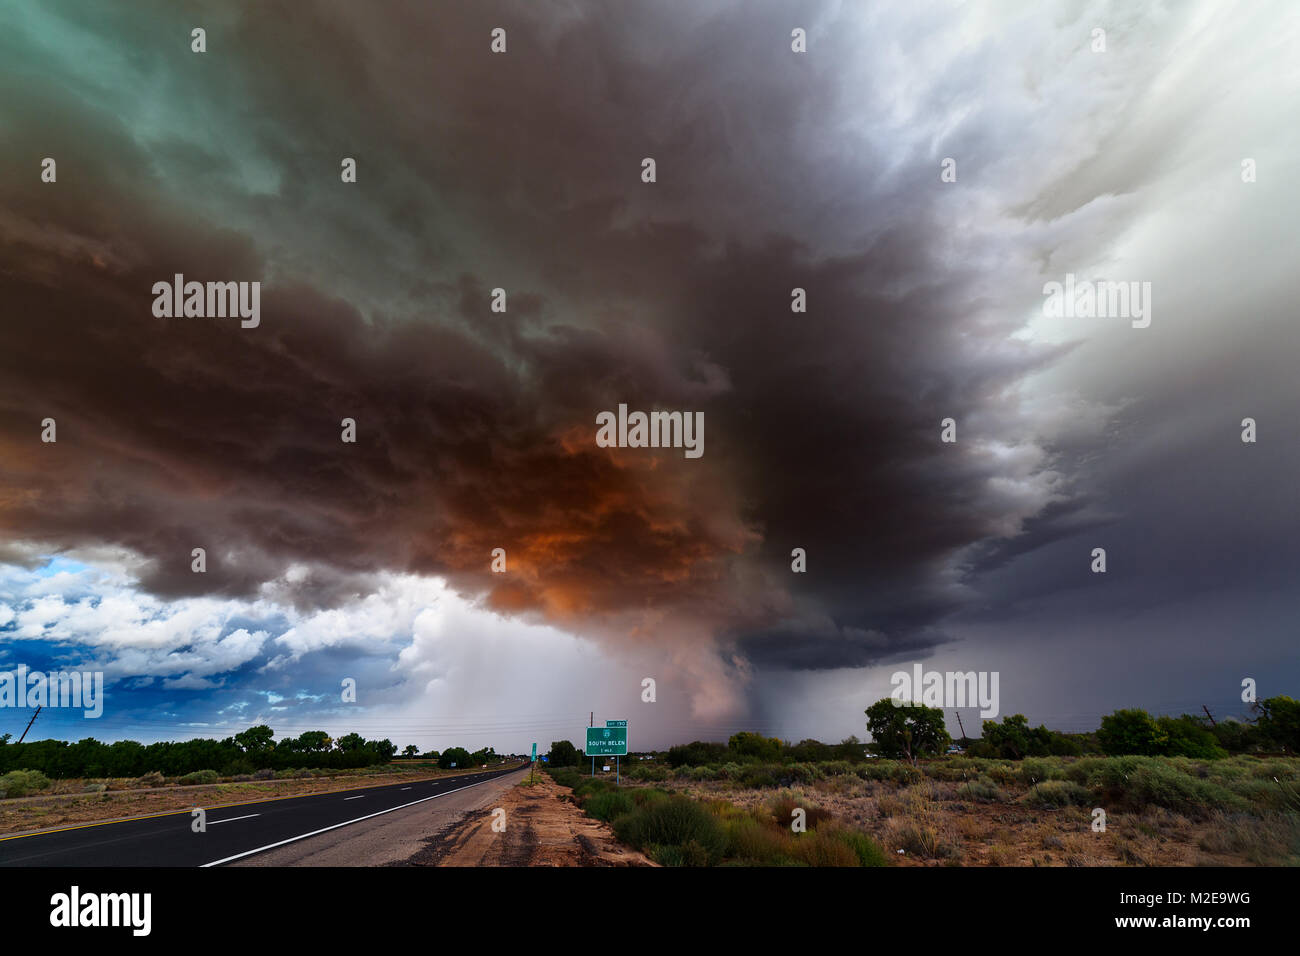 Ominous storm clouds ahead of an approaching supercell thunderstorm near Belen, New Mexico Stock Photo